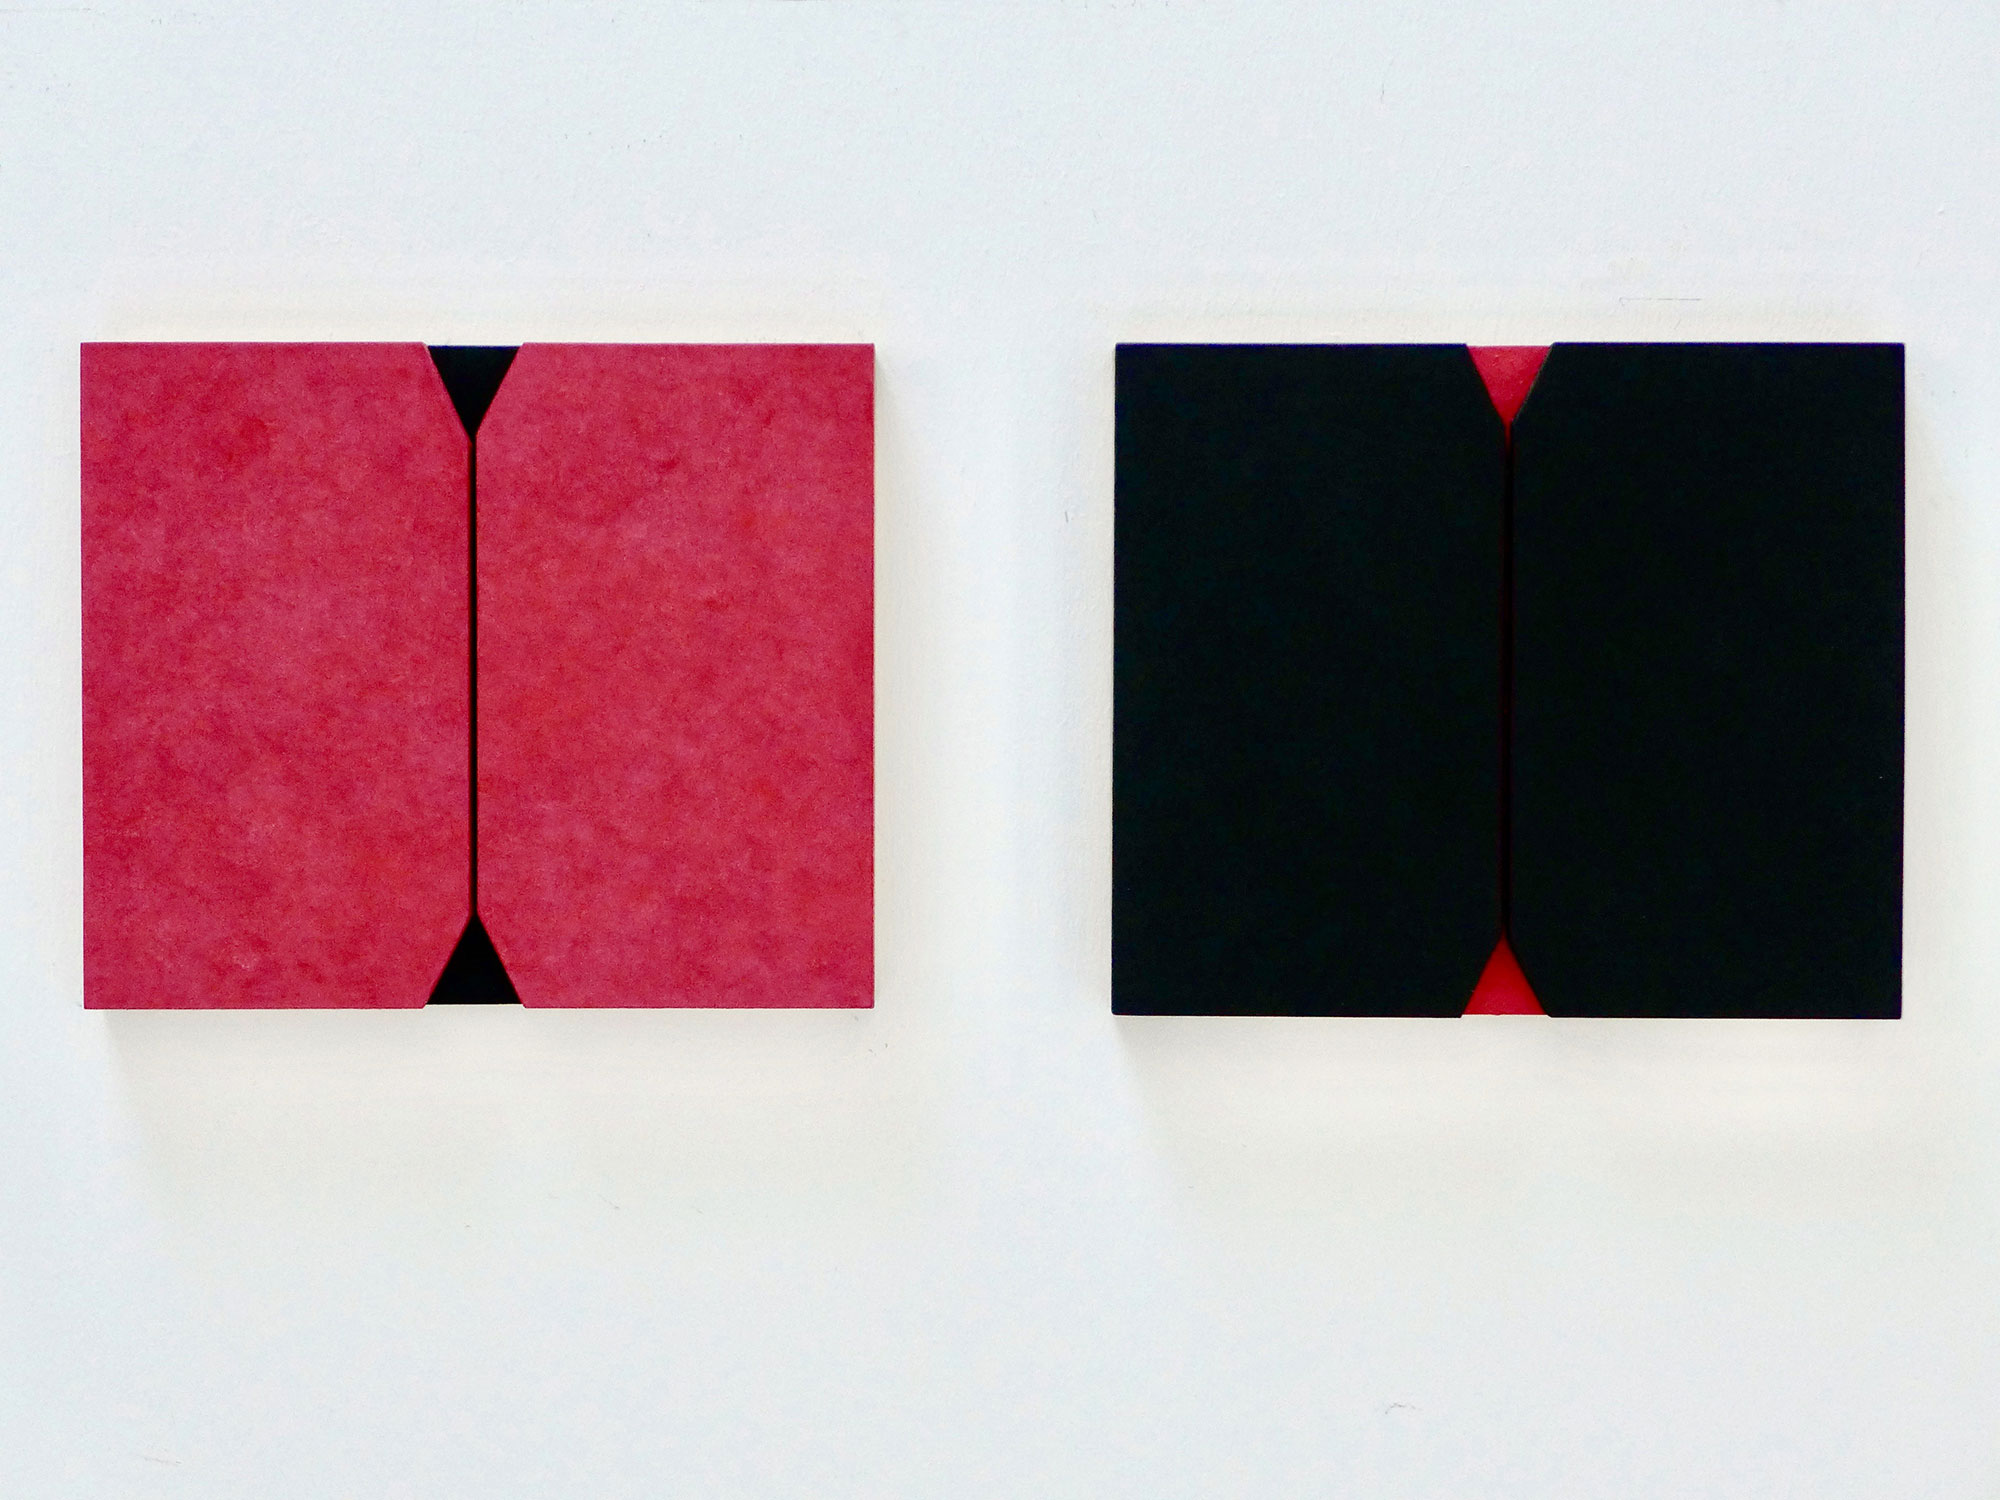 Kenneth Dingwall, Opening and Closing Passages, 2012, casein on wood, each 17cm x 20cm x 2cm